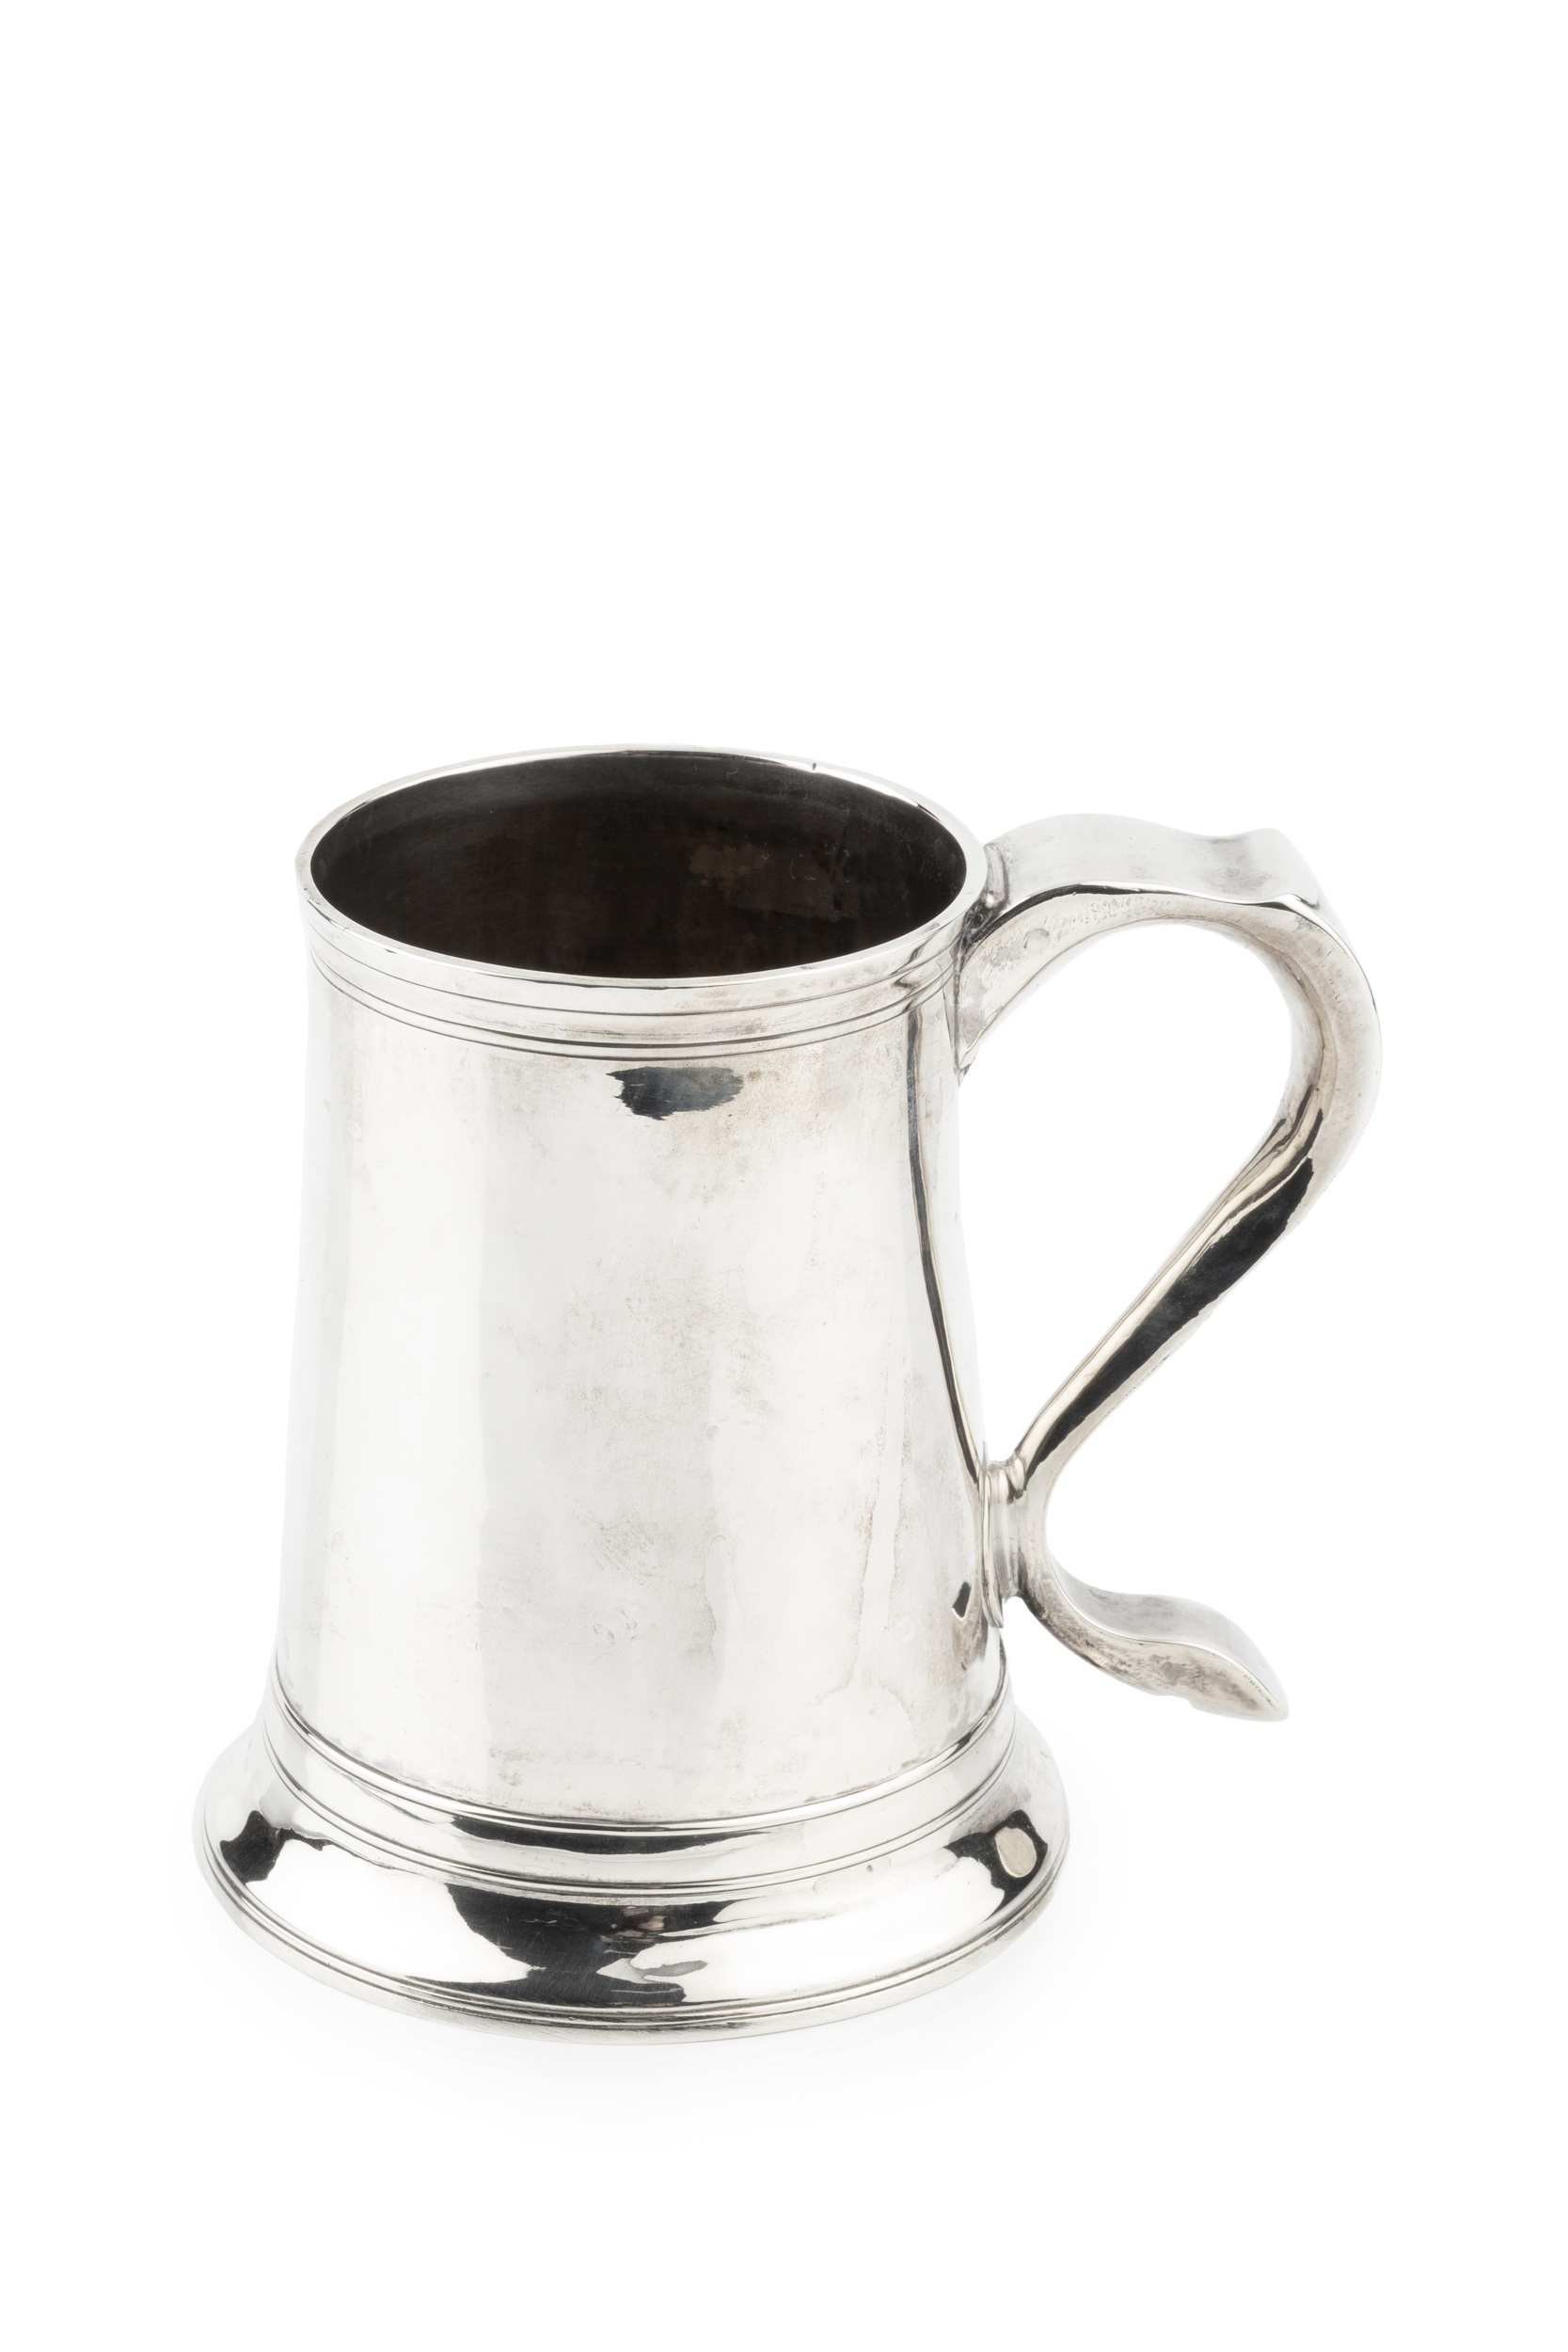 A George III silver pint mug, of plain slightly tapered design, the scroll handle with engraved